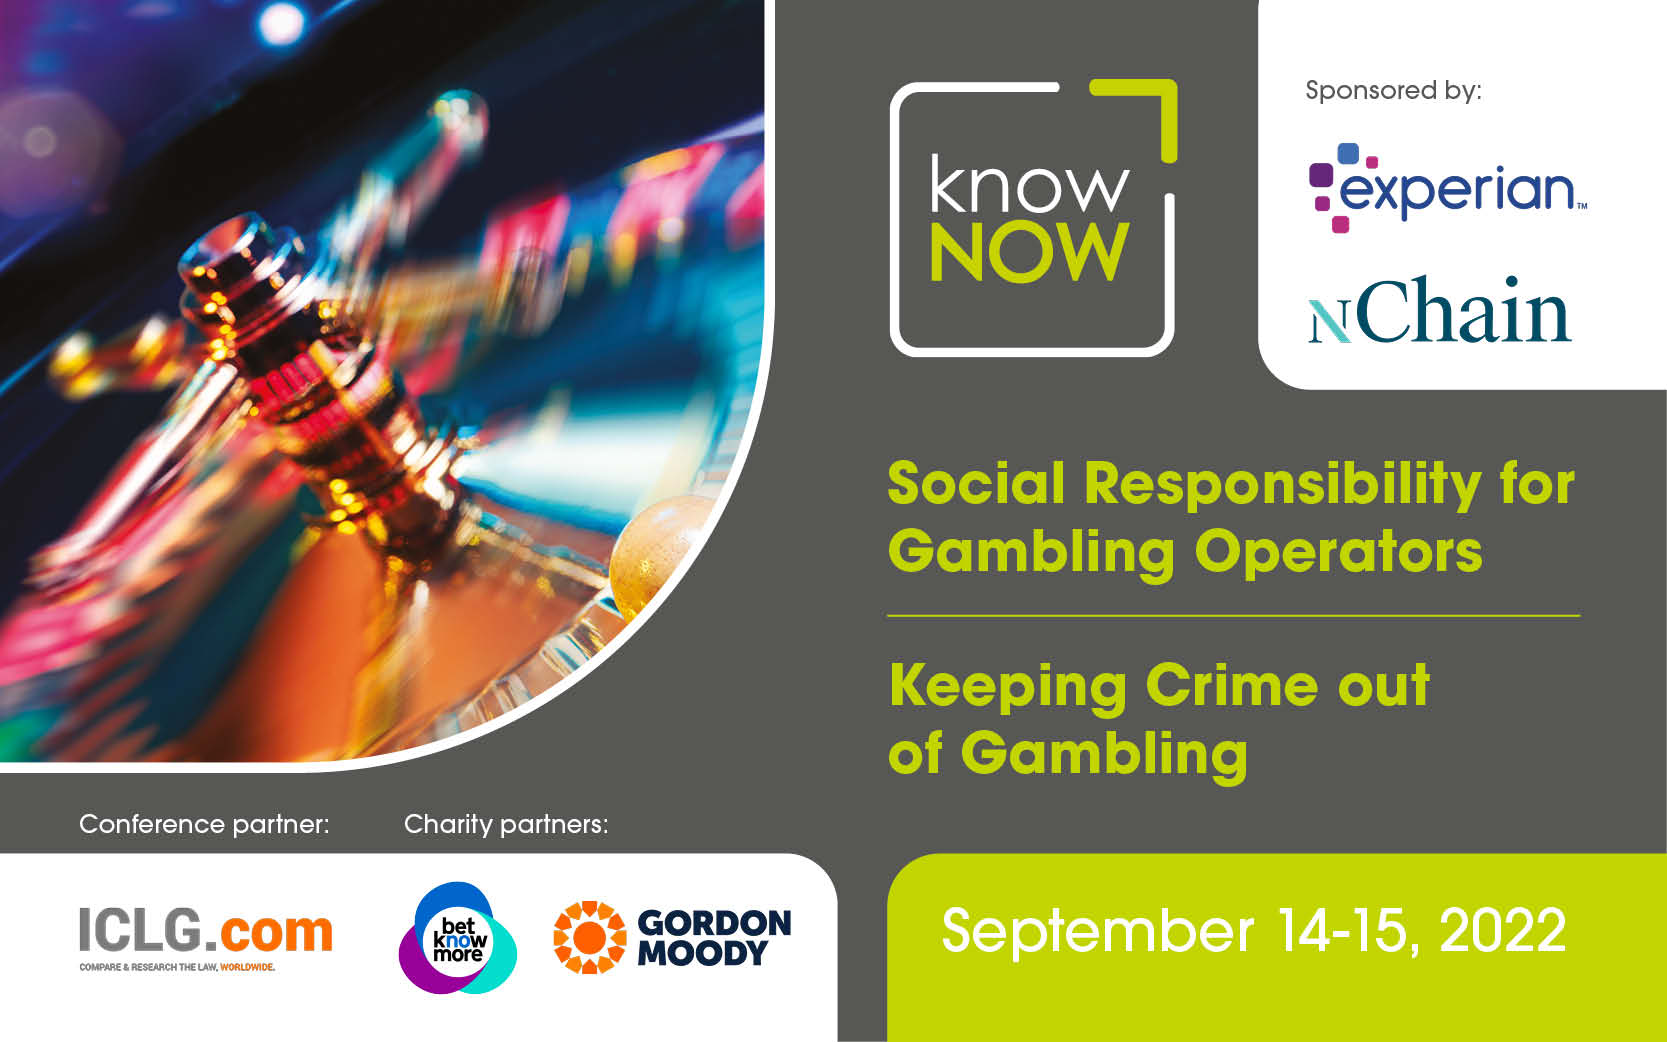 5th Annual KnowNow Conference - Social Responsibility for Gambling Operators and Keeping Crime out of Gambling